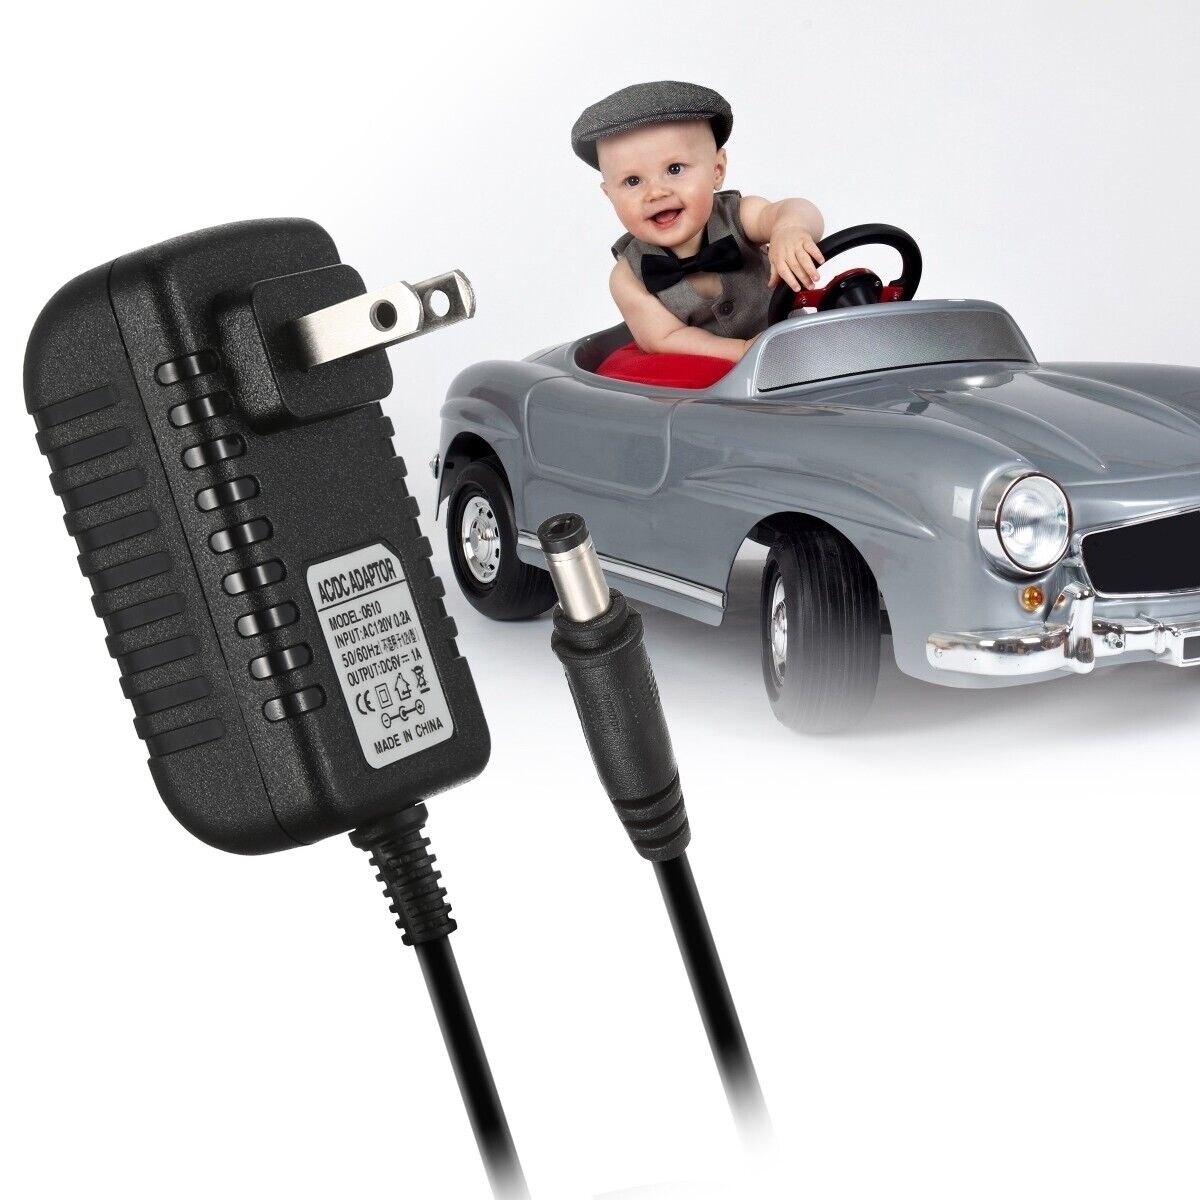 6 Volt Battery Charger for Kids Powered Ride On Car Best Choice Product Kid Trax Unbranded Does Not Apply - фотография #6